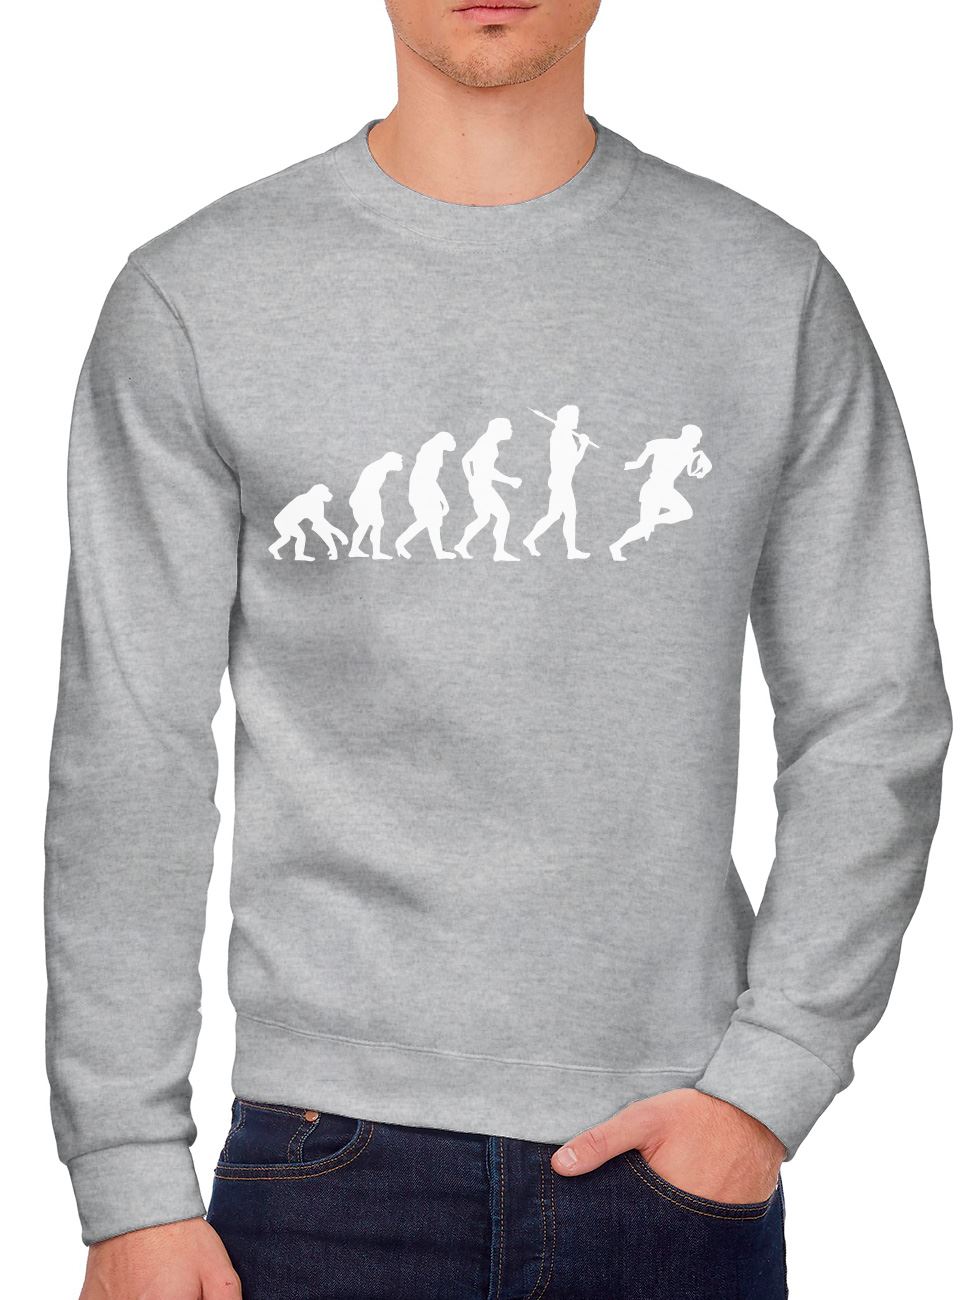 Evolution of a Rugby Player - Youth & Mens Sweatshirt